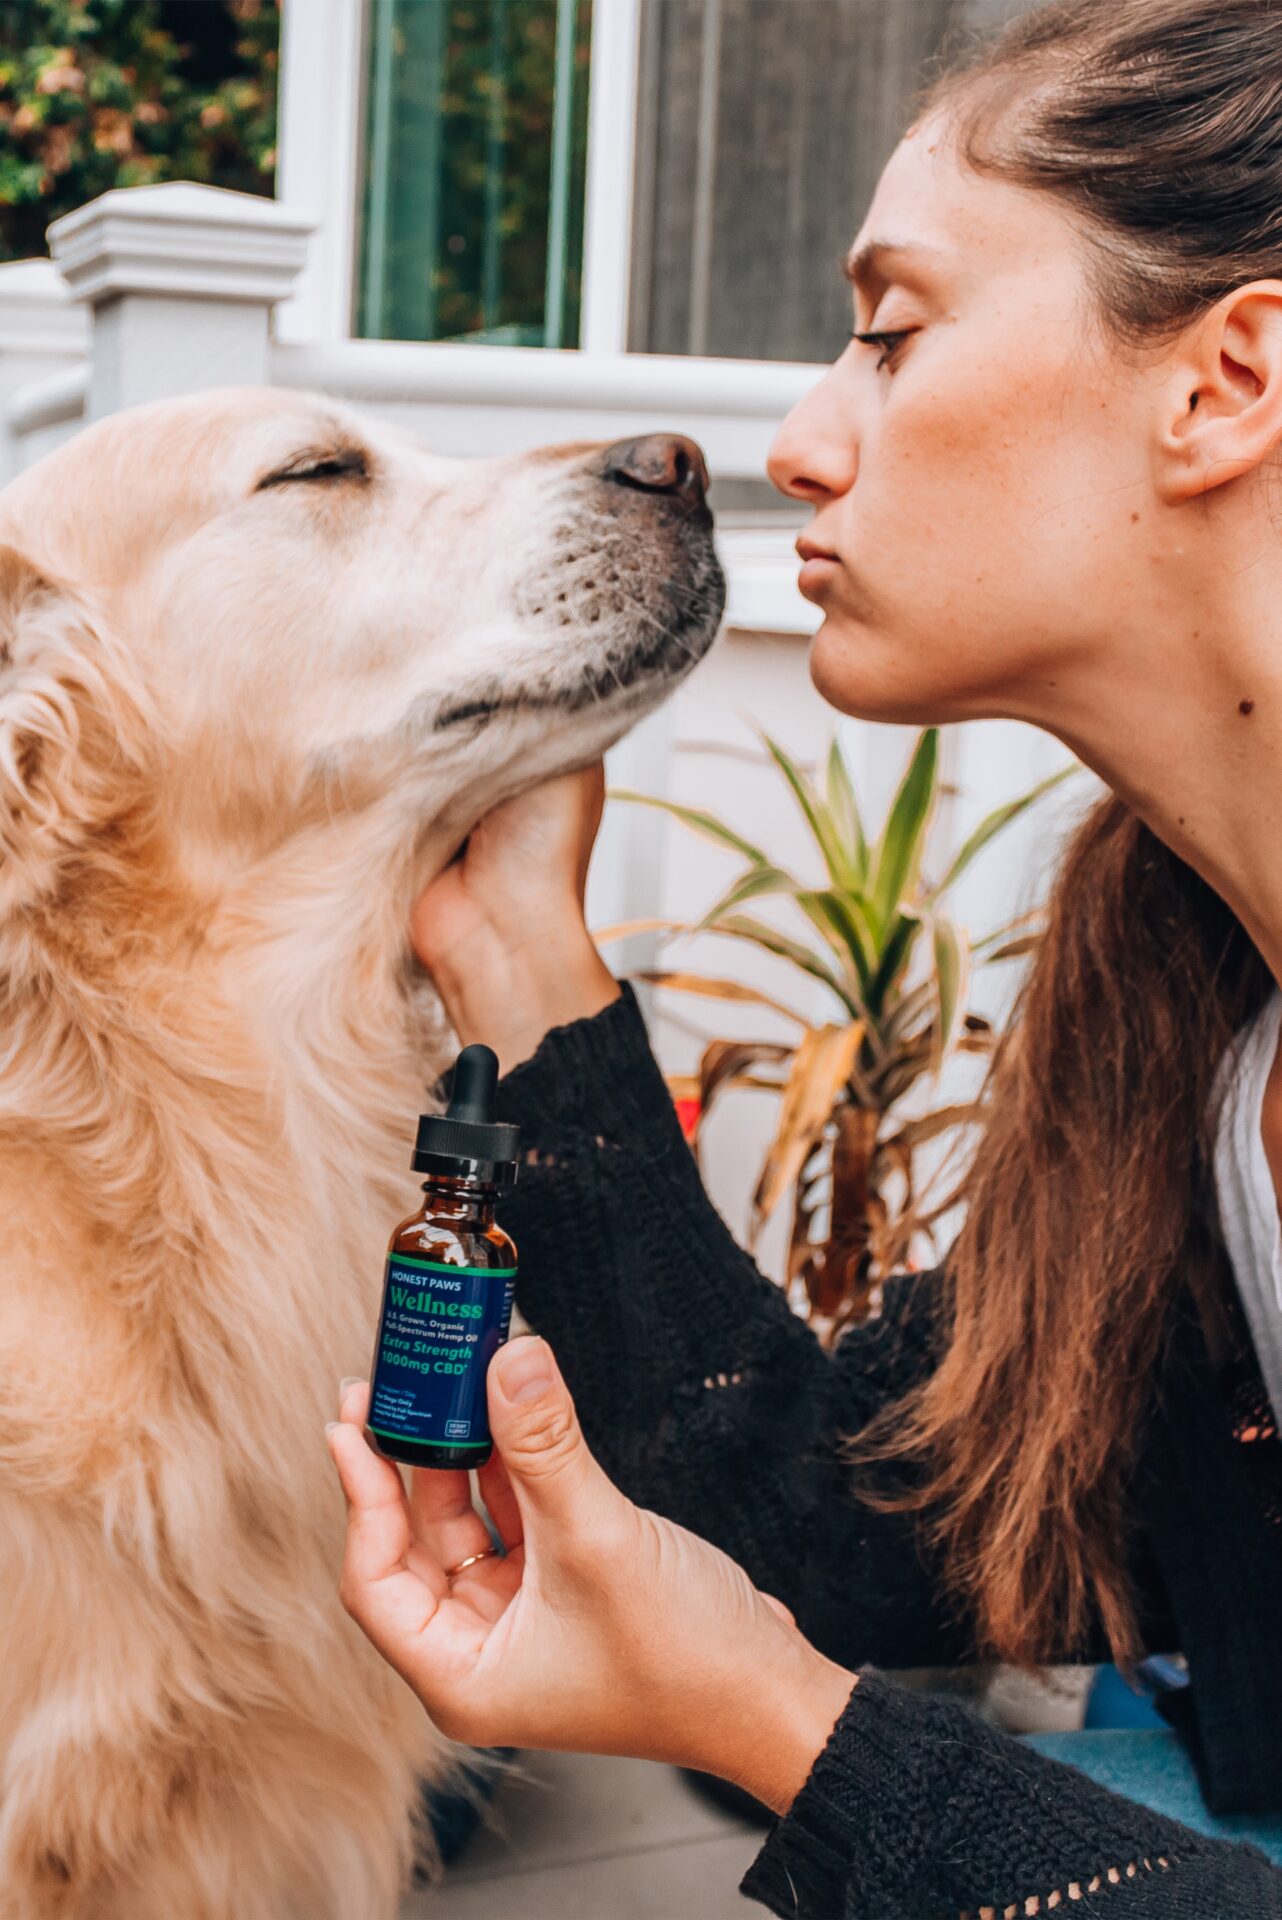 Potential Benefits of CBD for Dogs